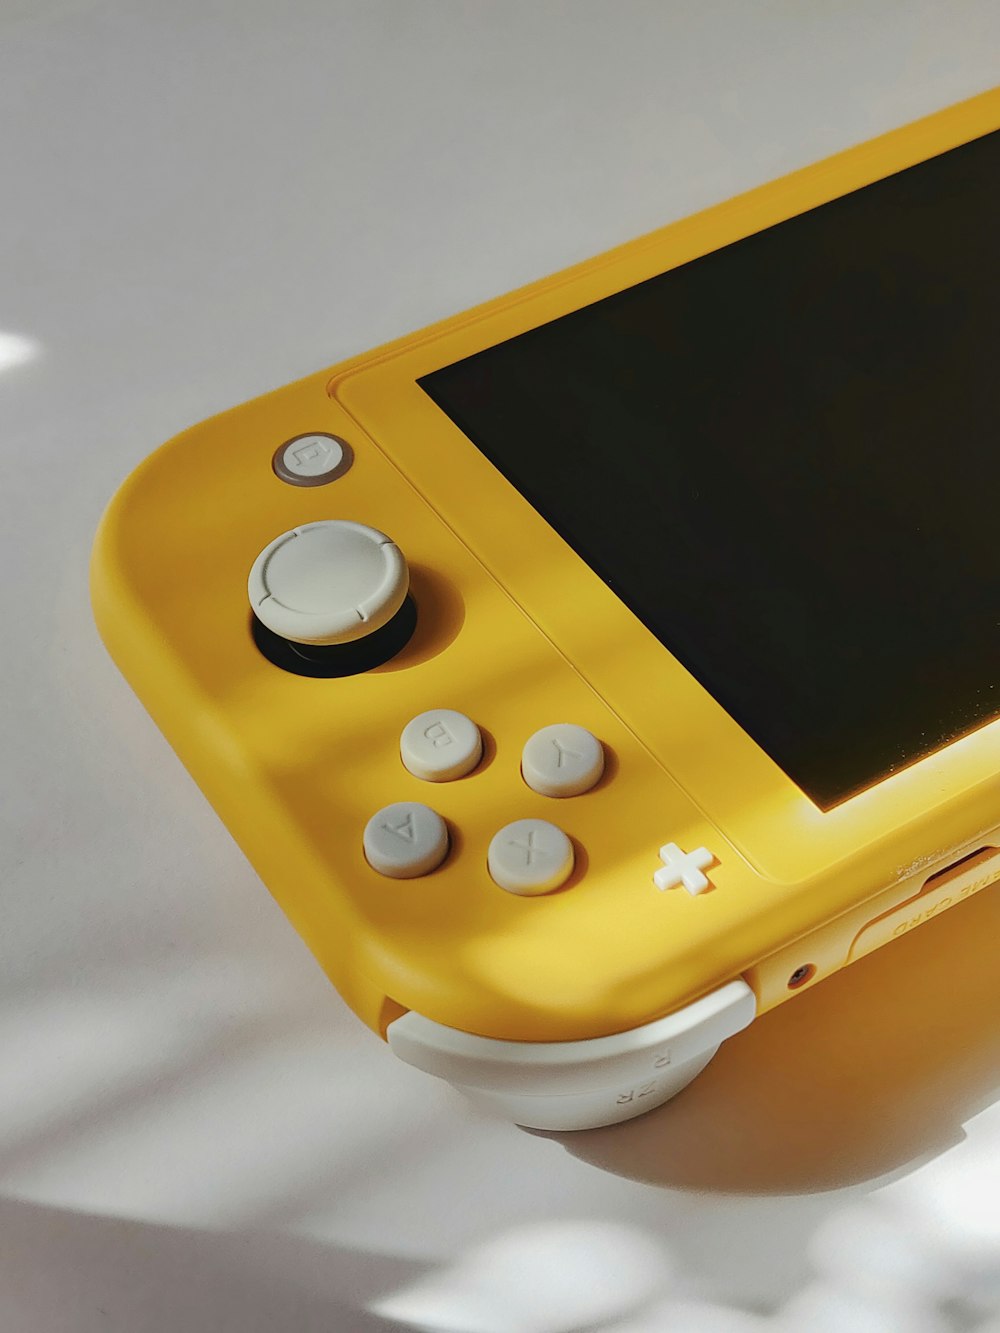 yellow and white game console